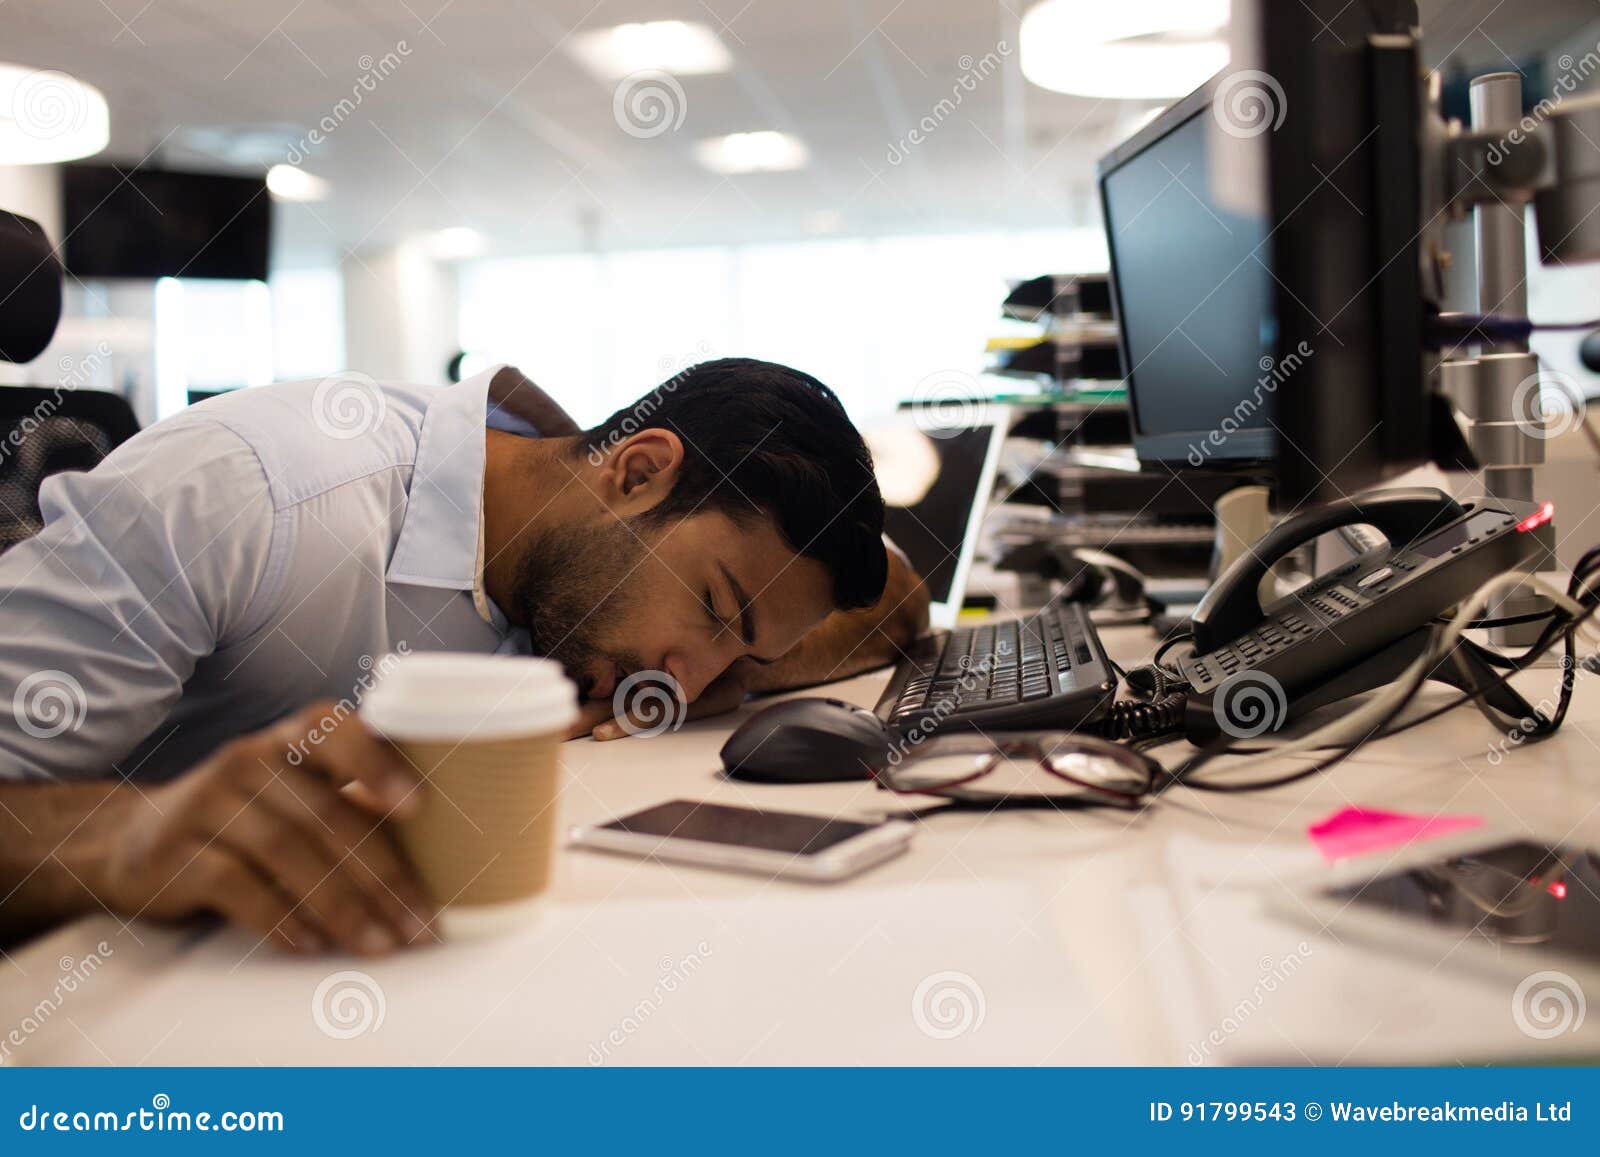 Tired Businessman Sleeping By Desktop Computers At Office Stock